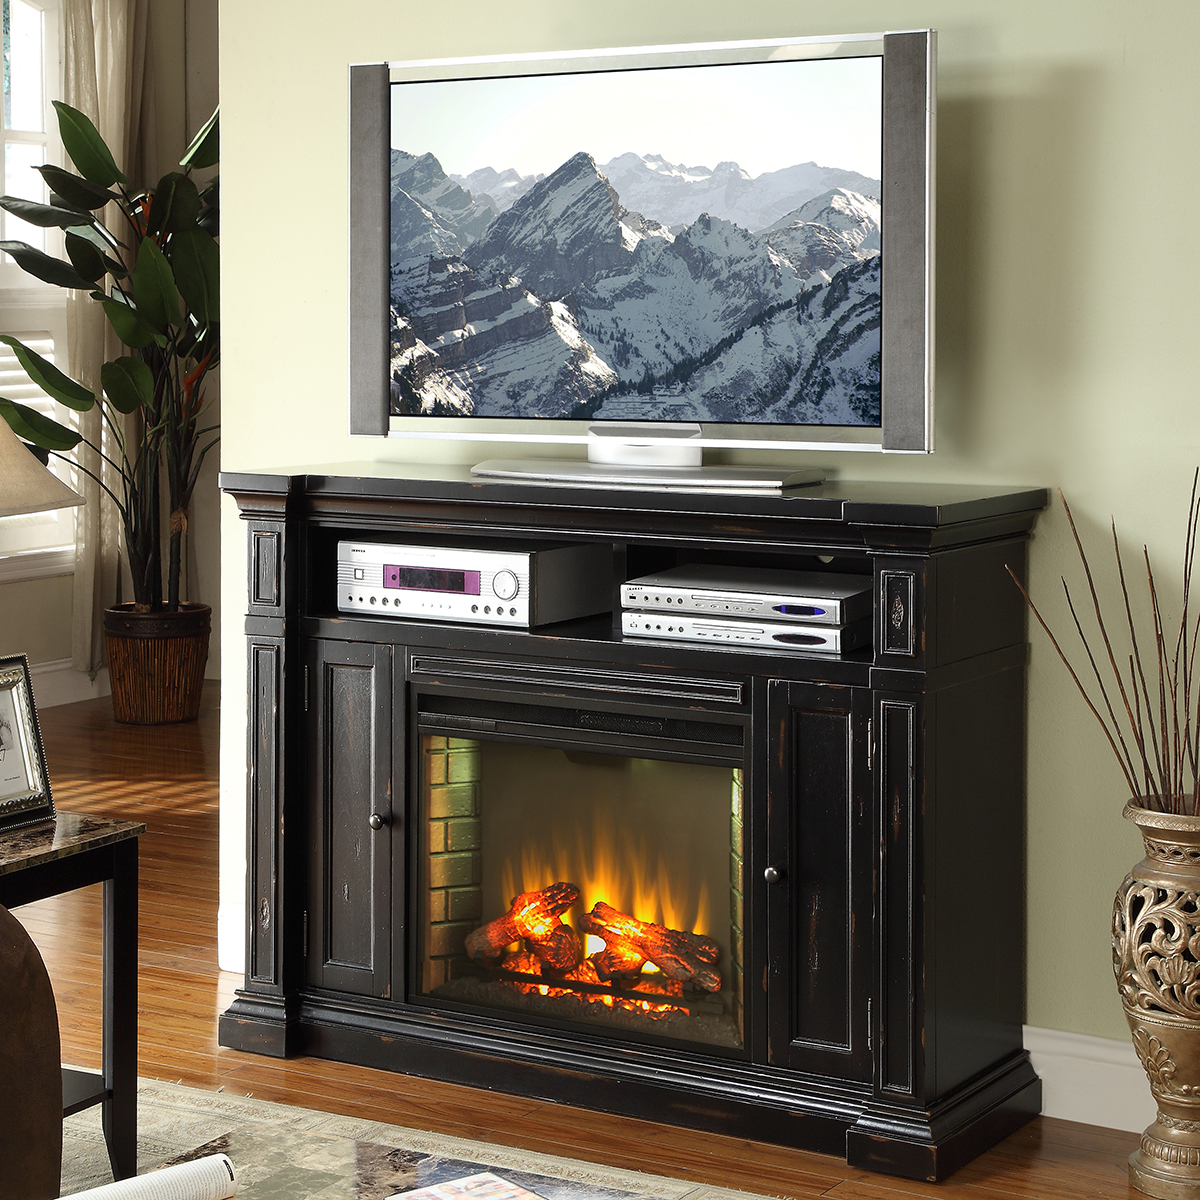 Electric Fireplace with Wood Mantel New Manchester 58" Fireplace Media Center Tv Stand Mantel In